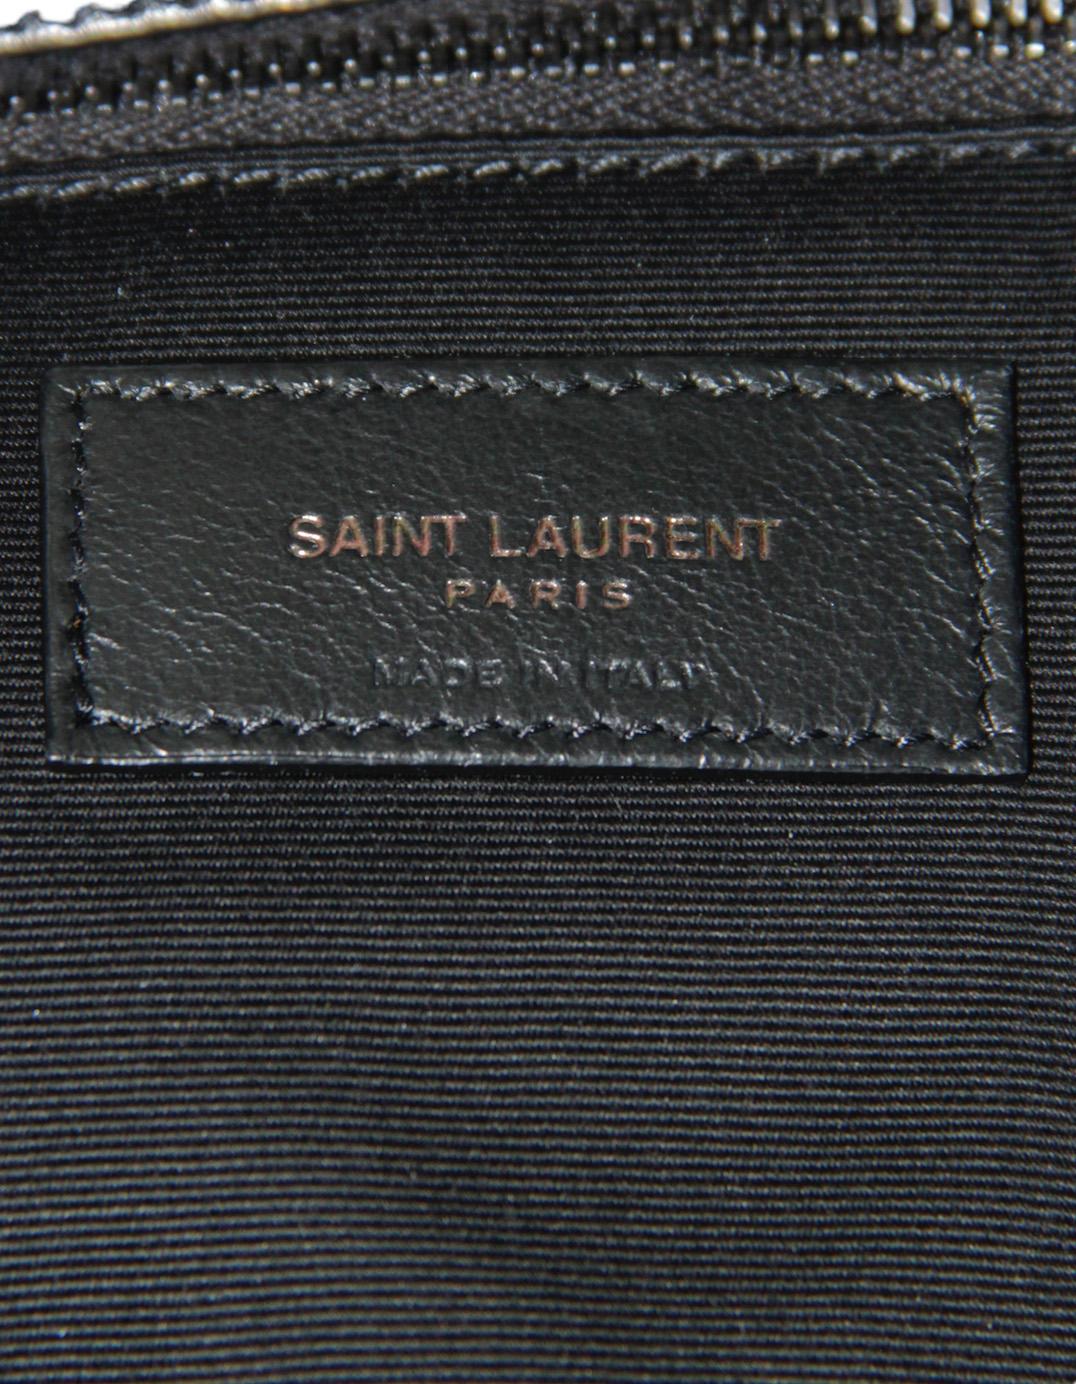 Saint Laurent NEW So Black Leather Small Loulou Puffer Bag rt. $3300 For Sale 4